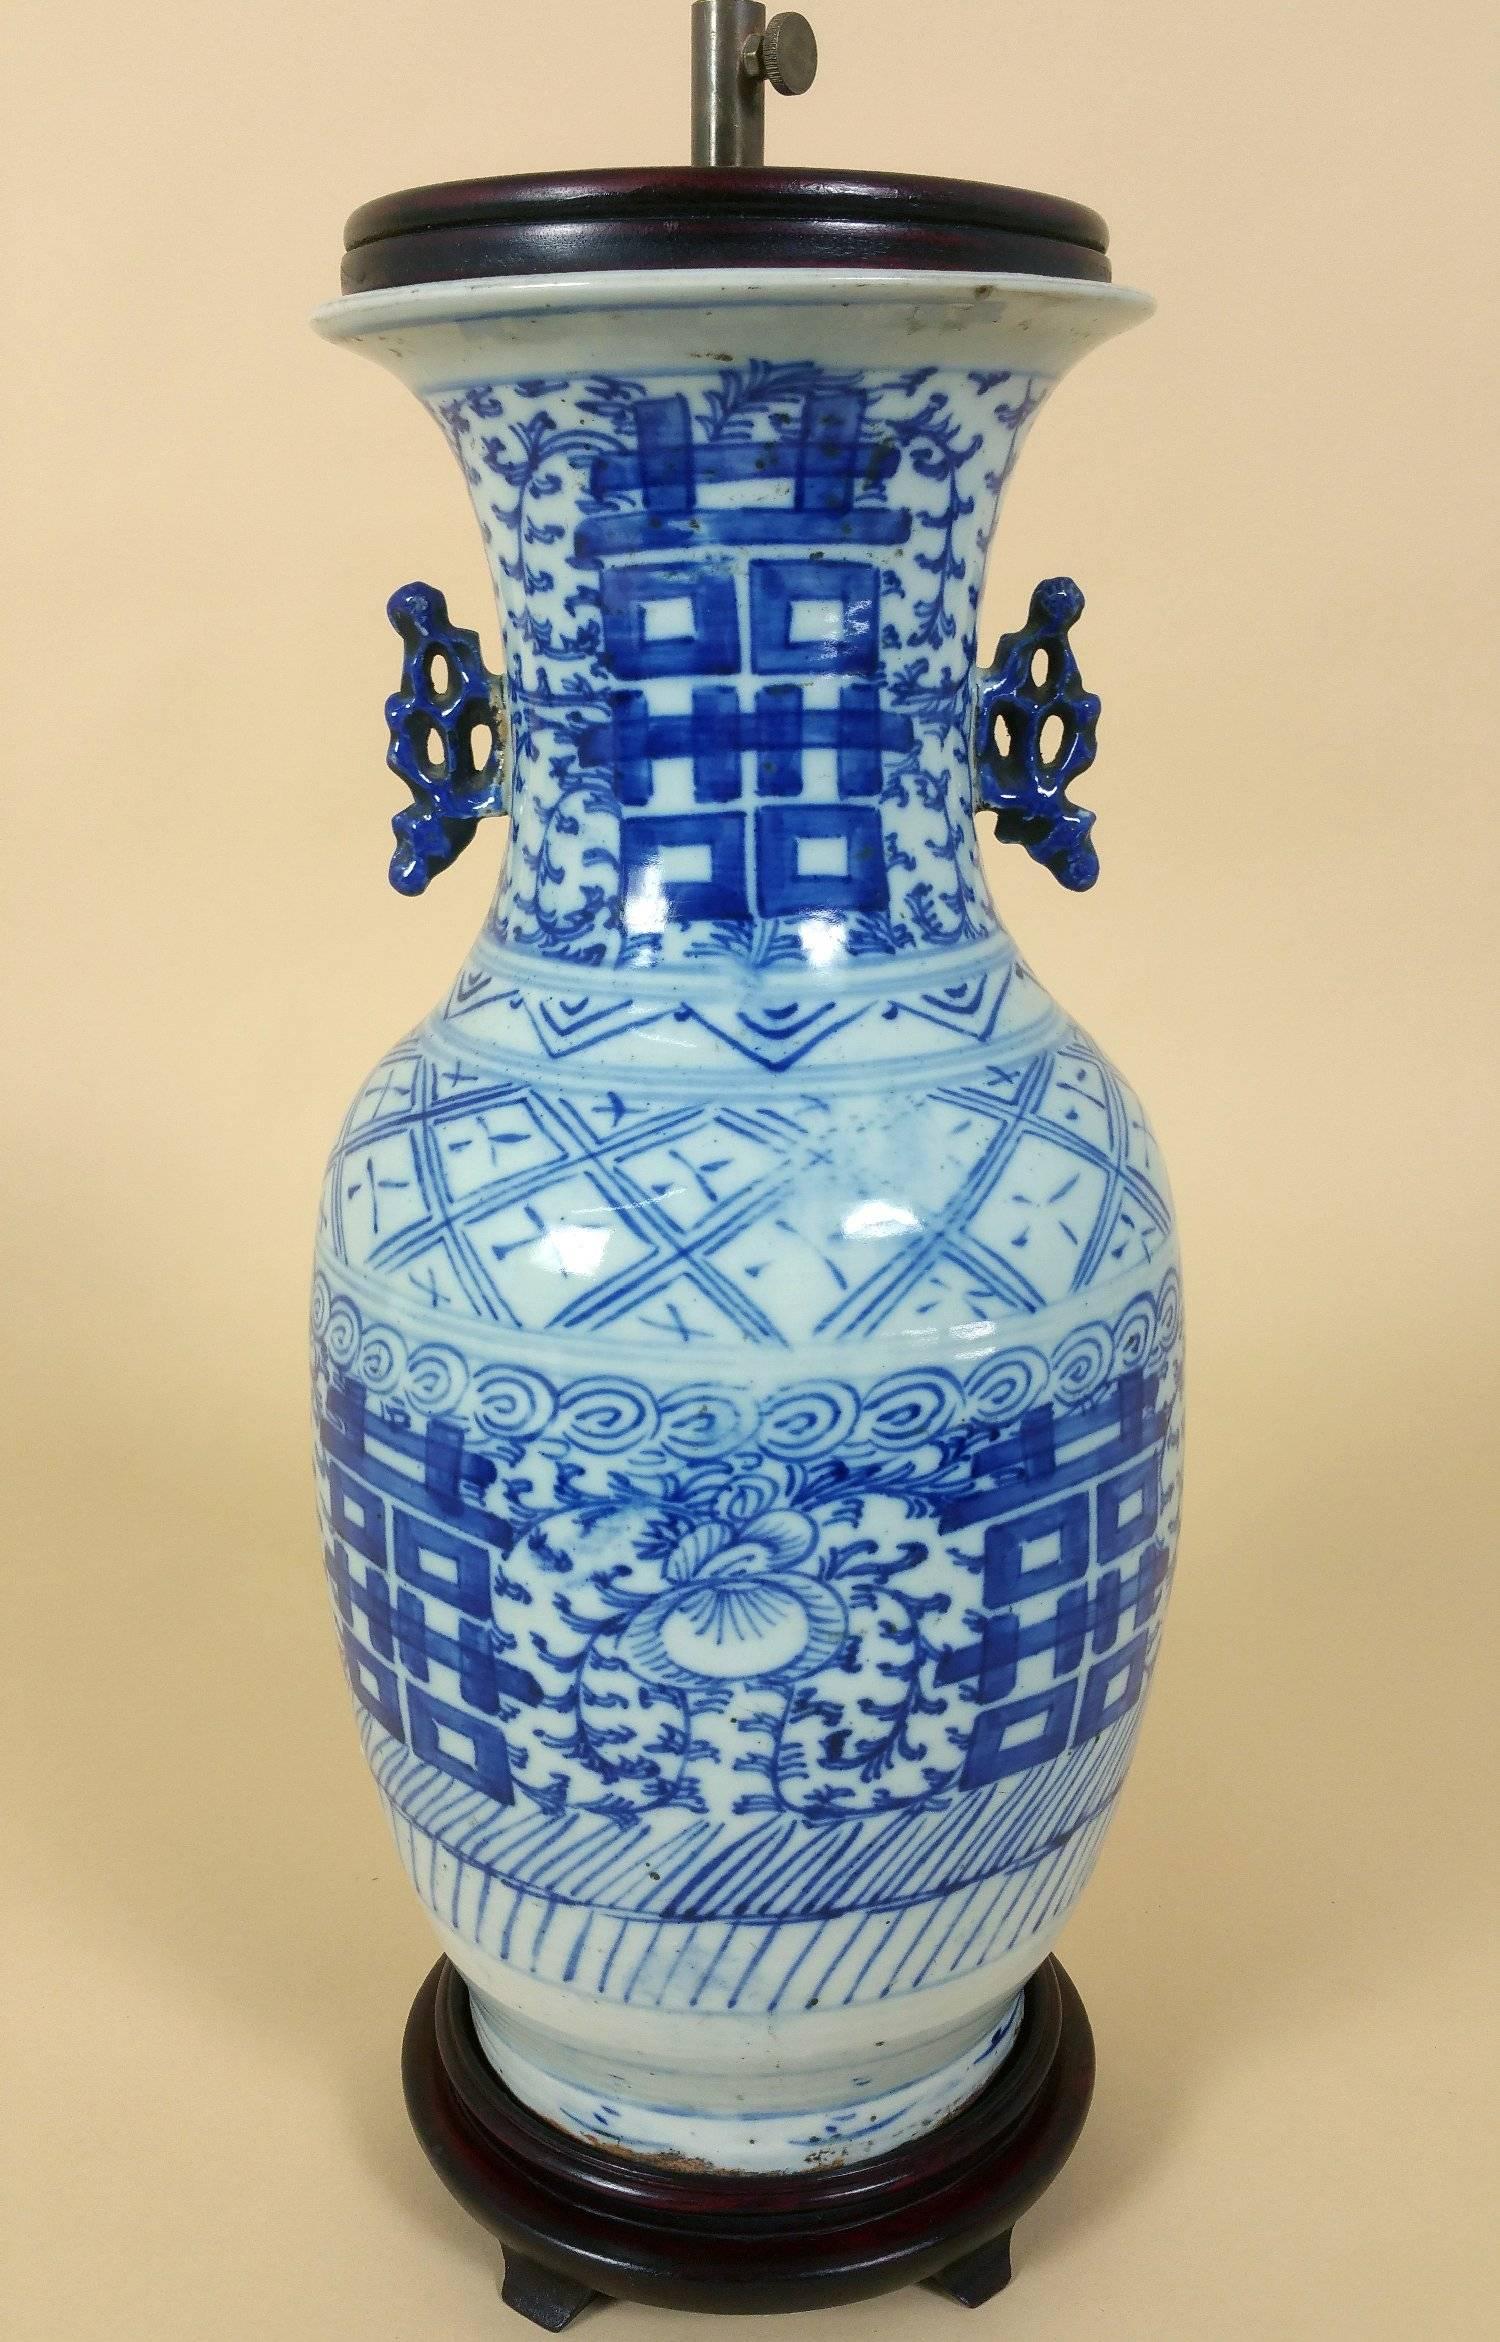 This attractive and well-proportioned late 19th century Chinese blue and white vase which has been converted to a table lamp. The piece features a twin handle design and is mounted on a hardwood stand with a matching cover. The brass fittings